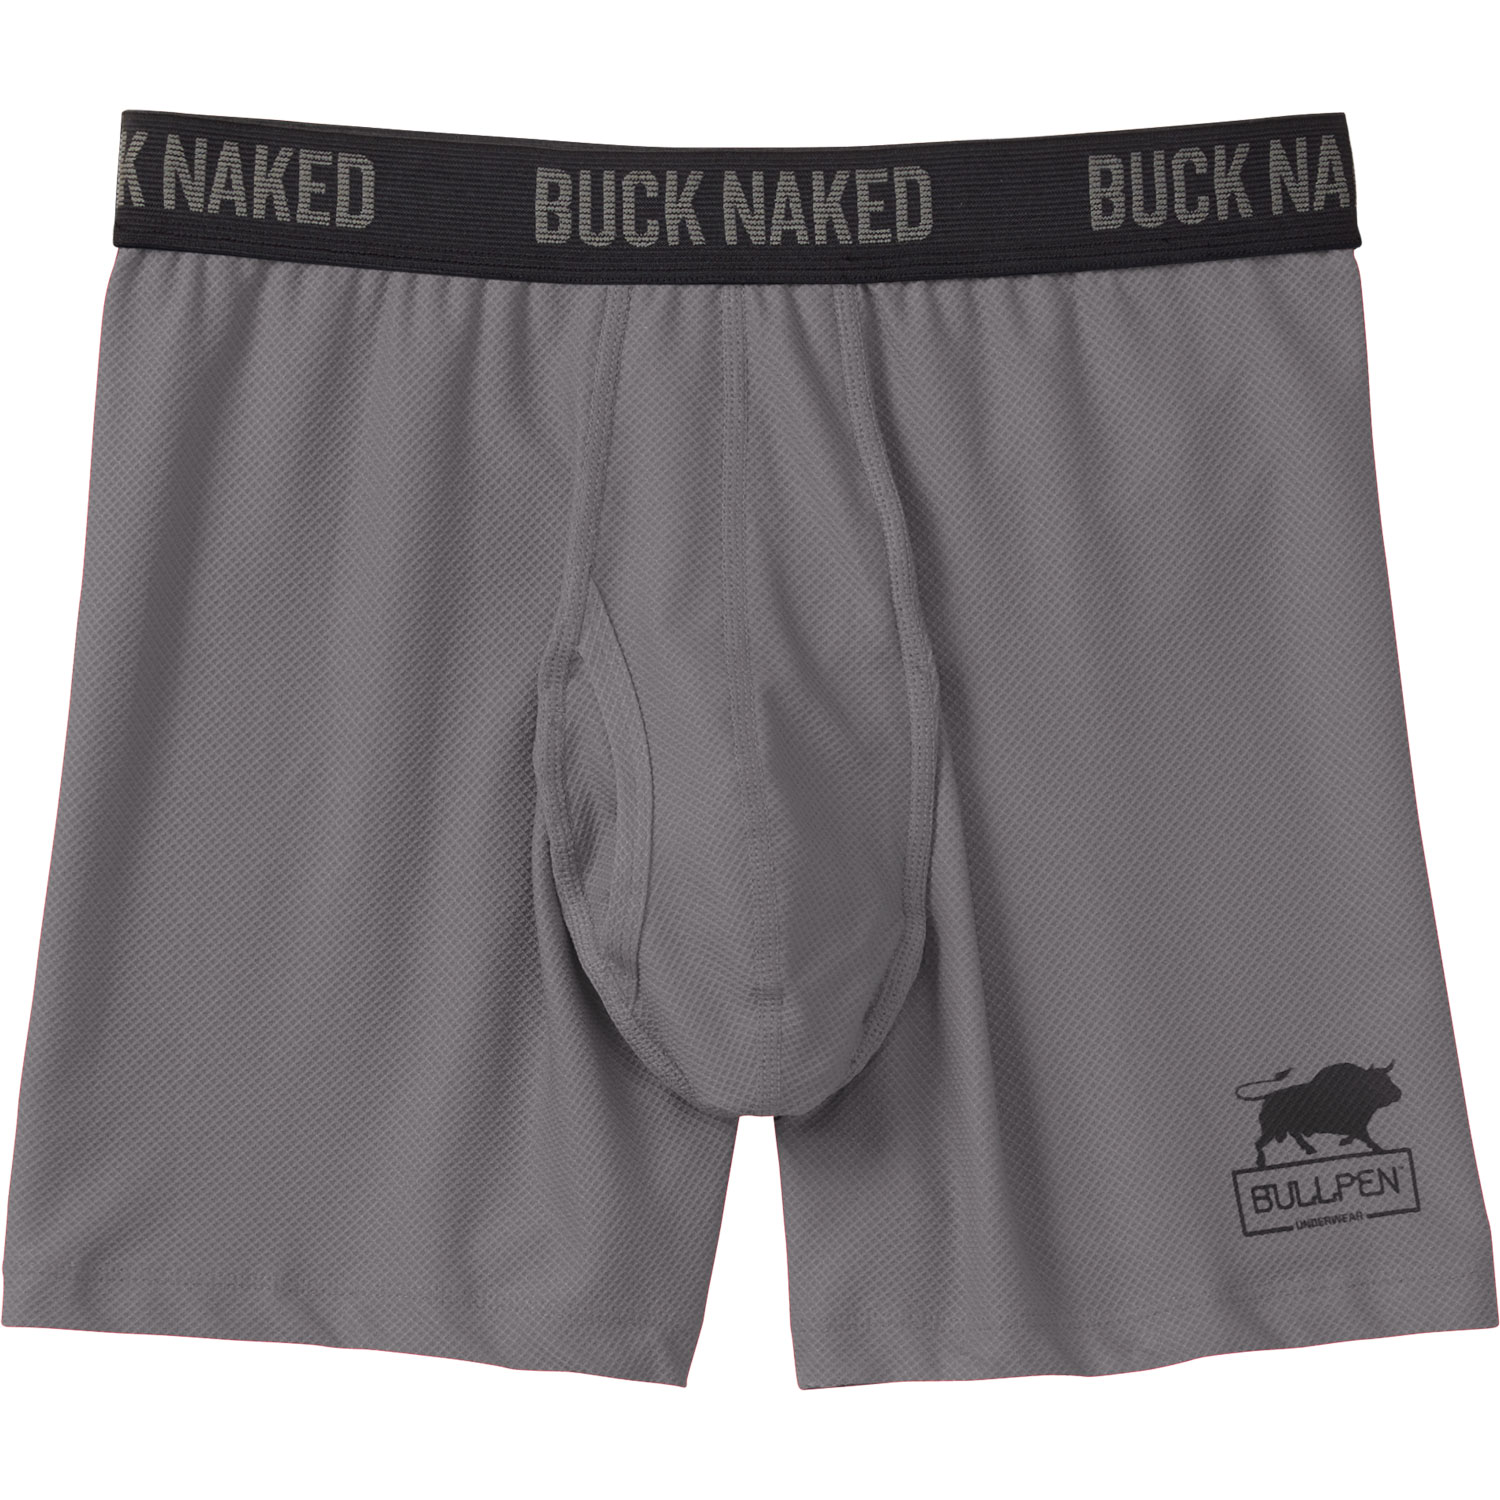 Duluth Trading Company Buck Naked Underwear White Briefs Review